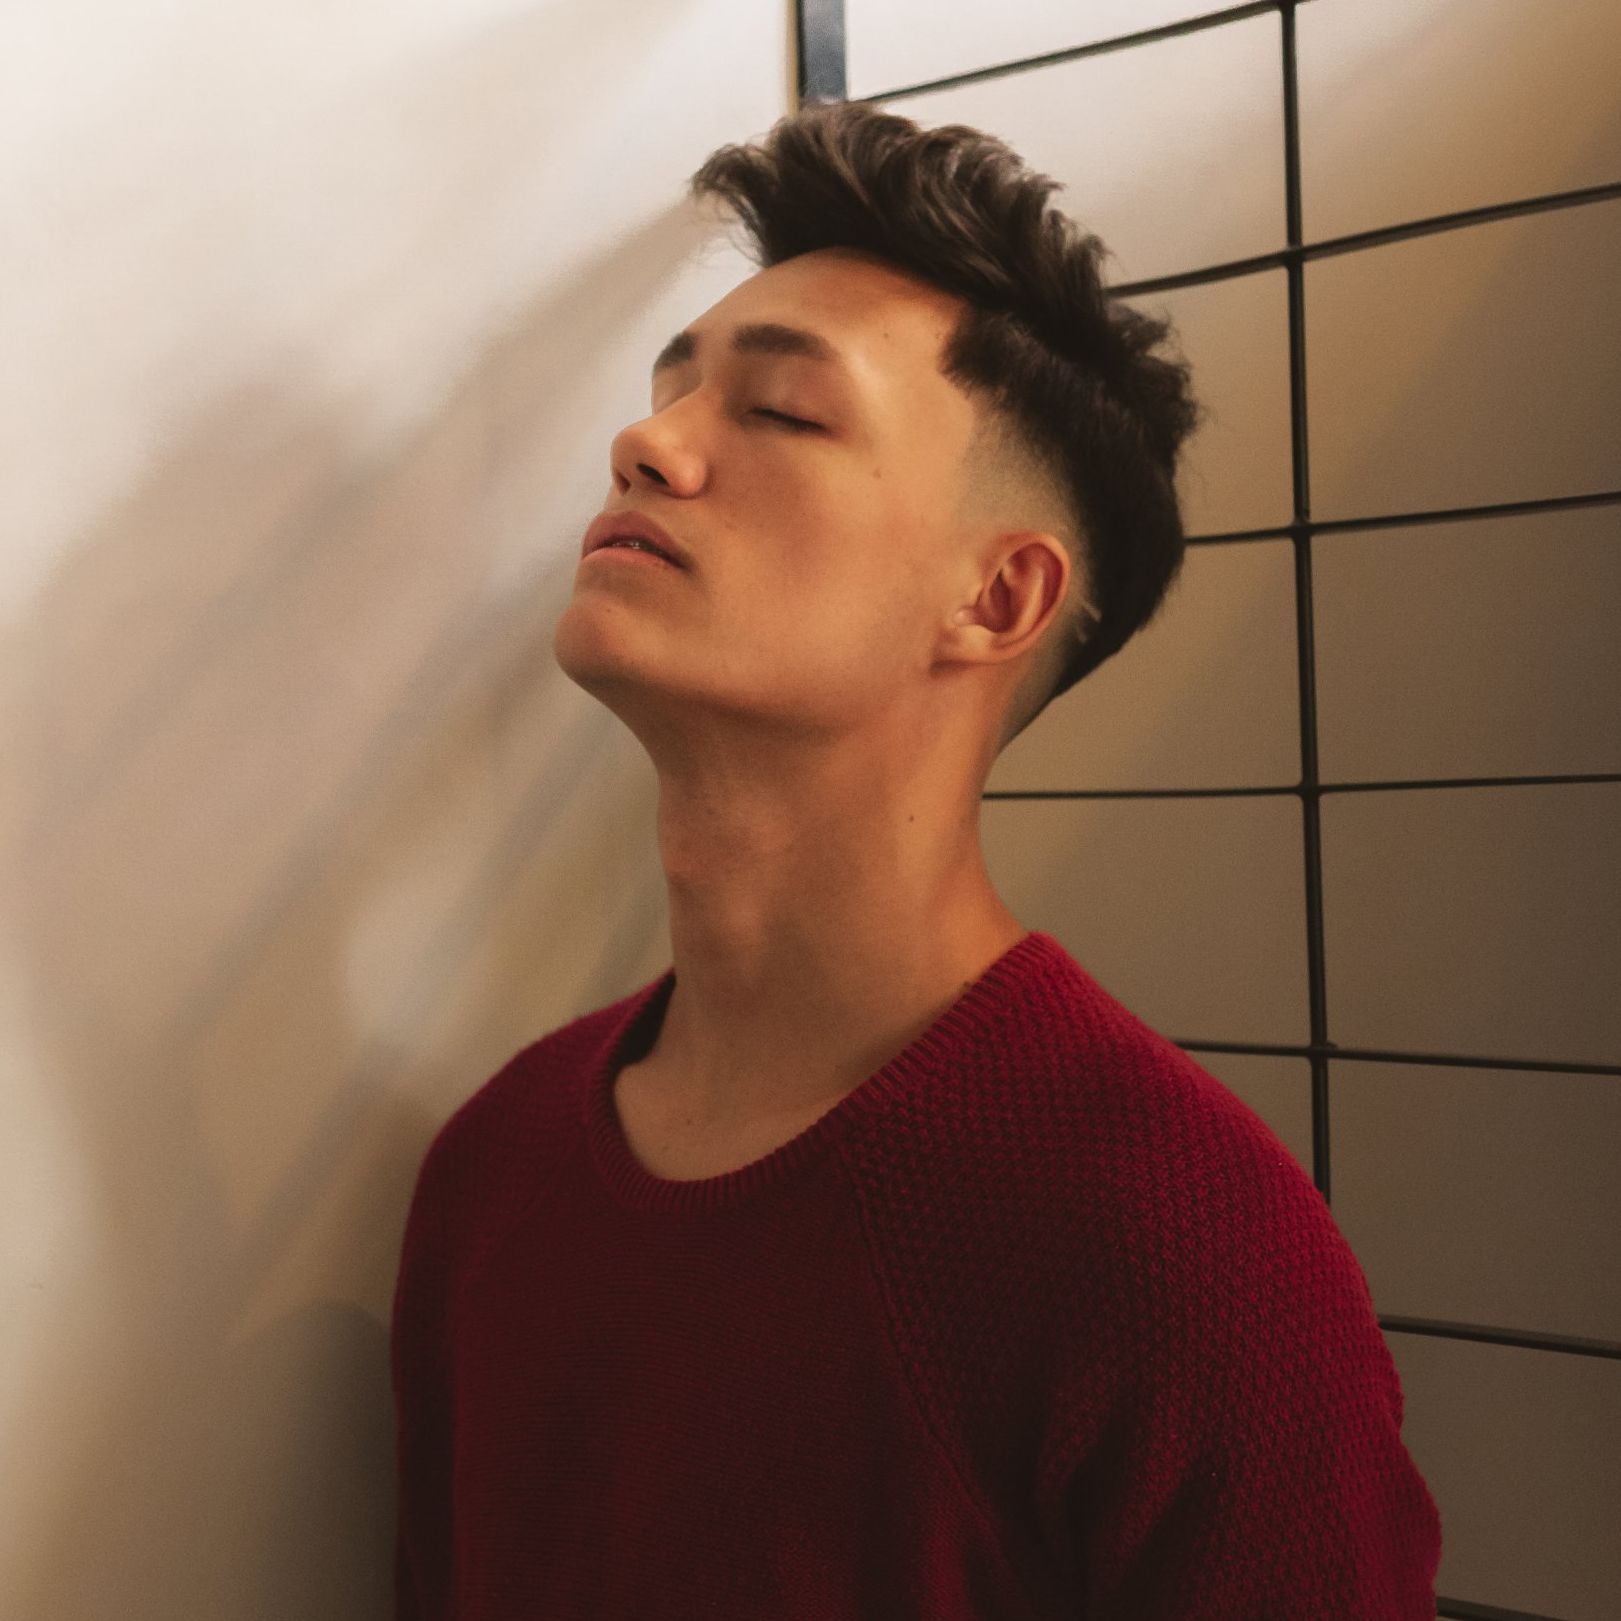 a young man in a red sweater leans against a wall with his eyes closed